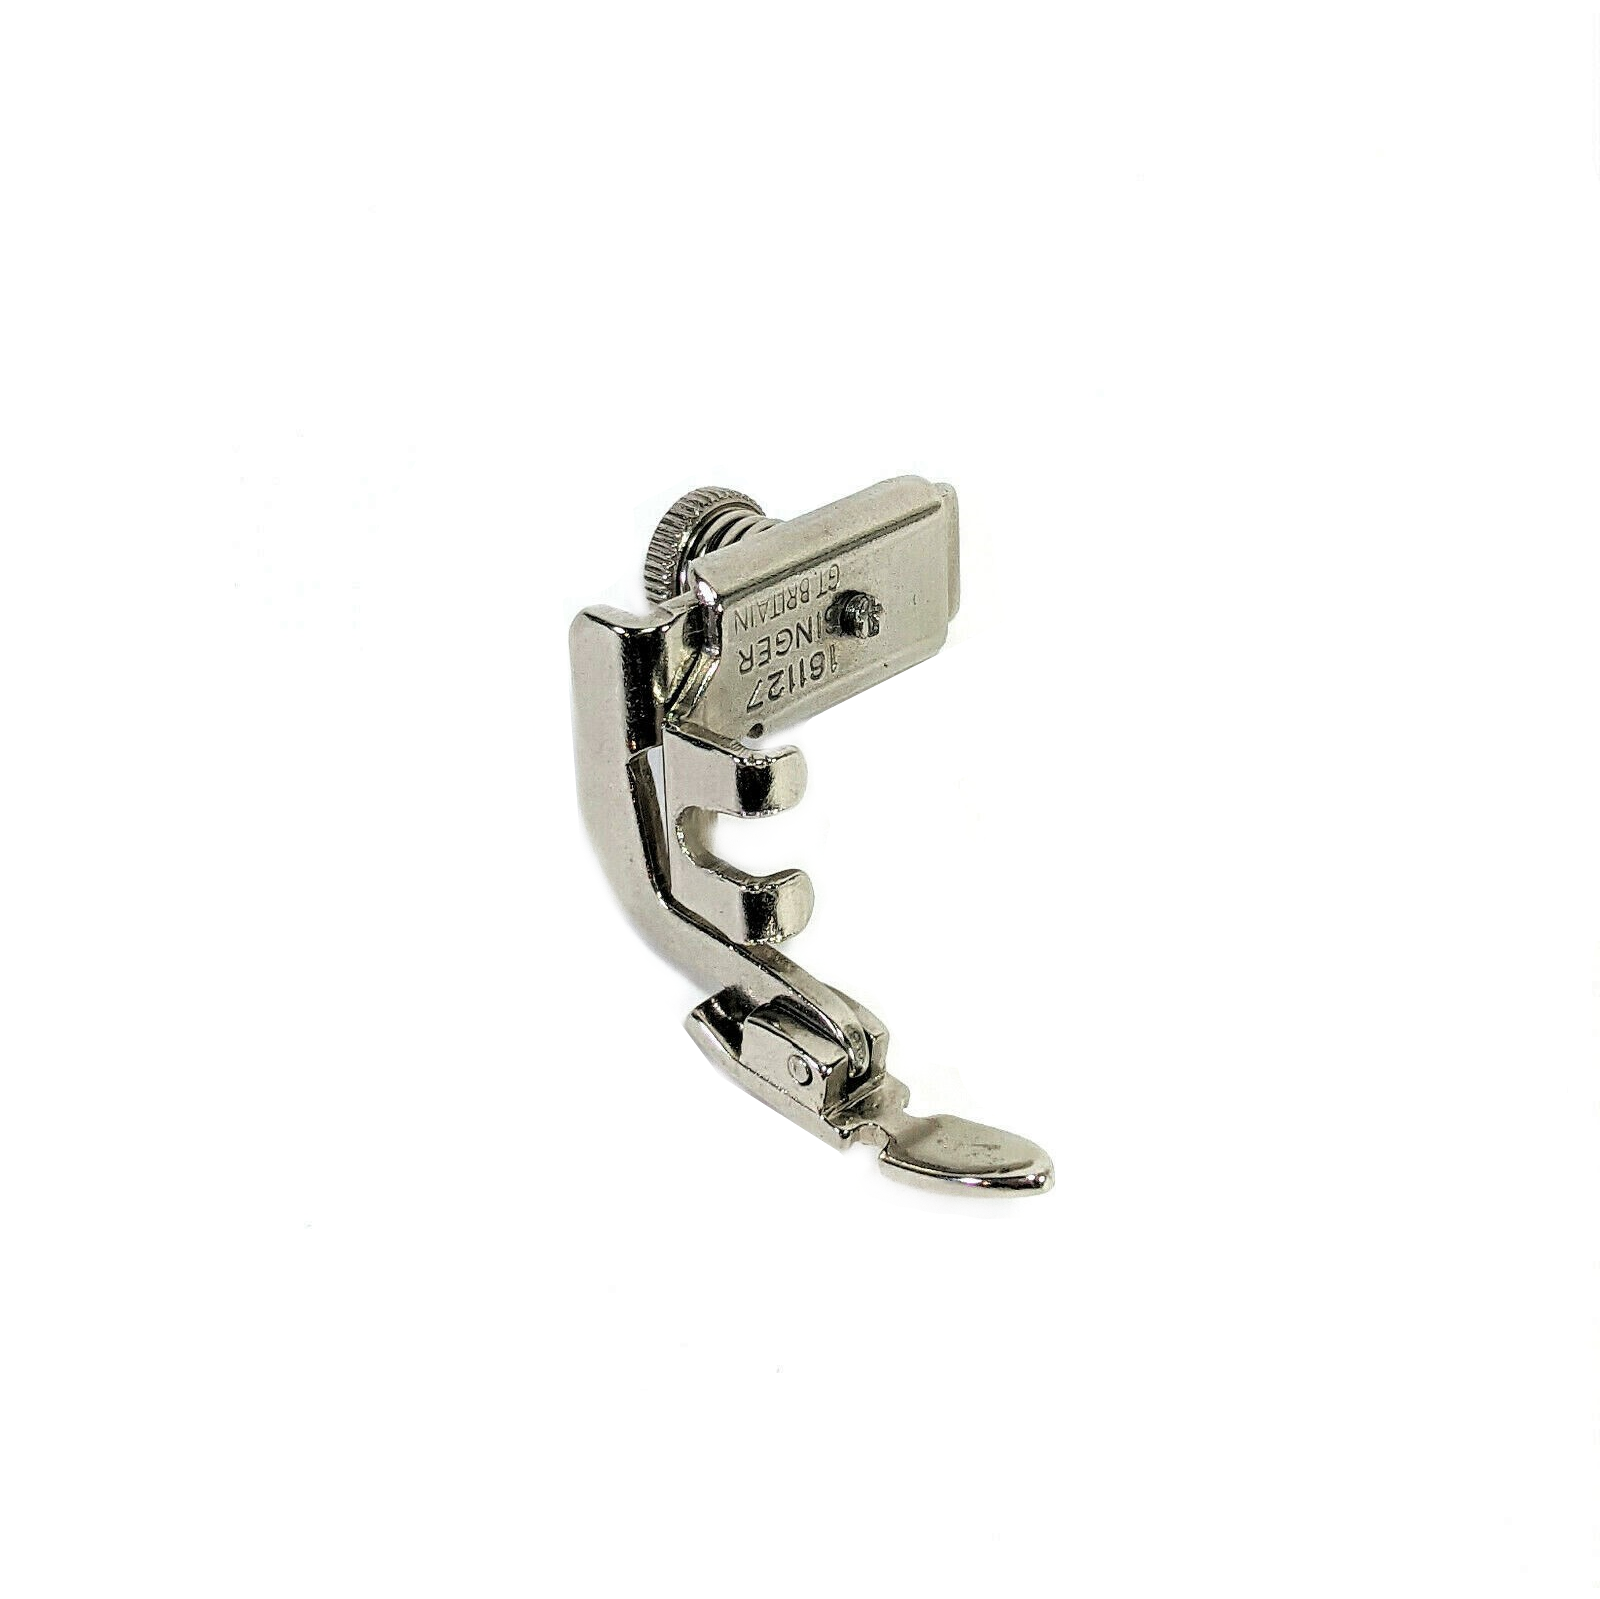 Metal Adjustable Zipper Foot 161127 Fits All Low Shank Machines Singer, Brother, Janome, New Home & More